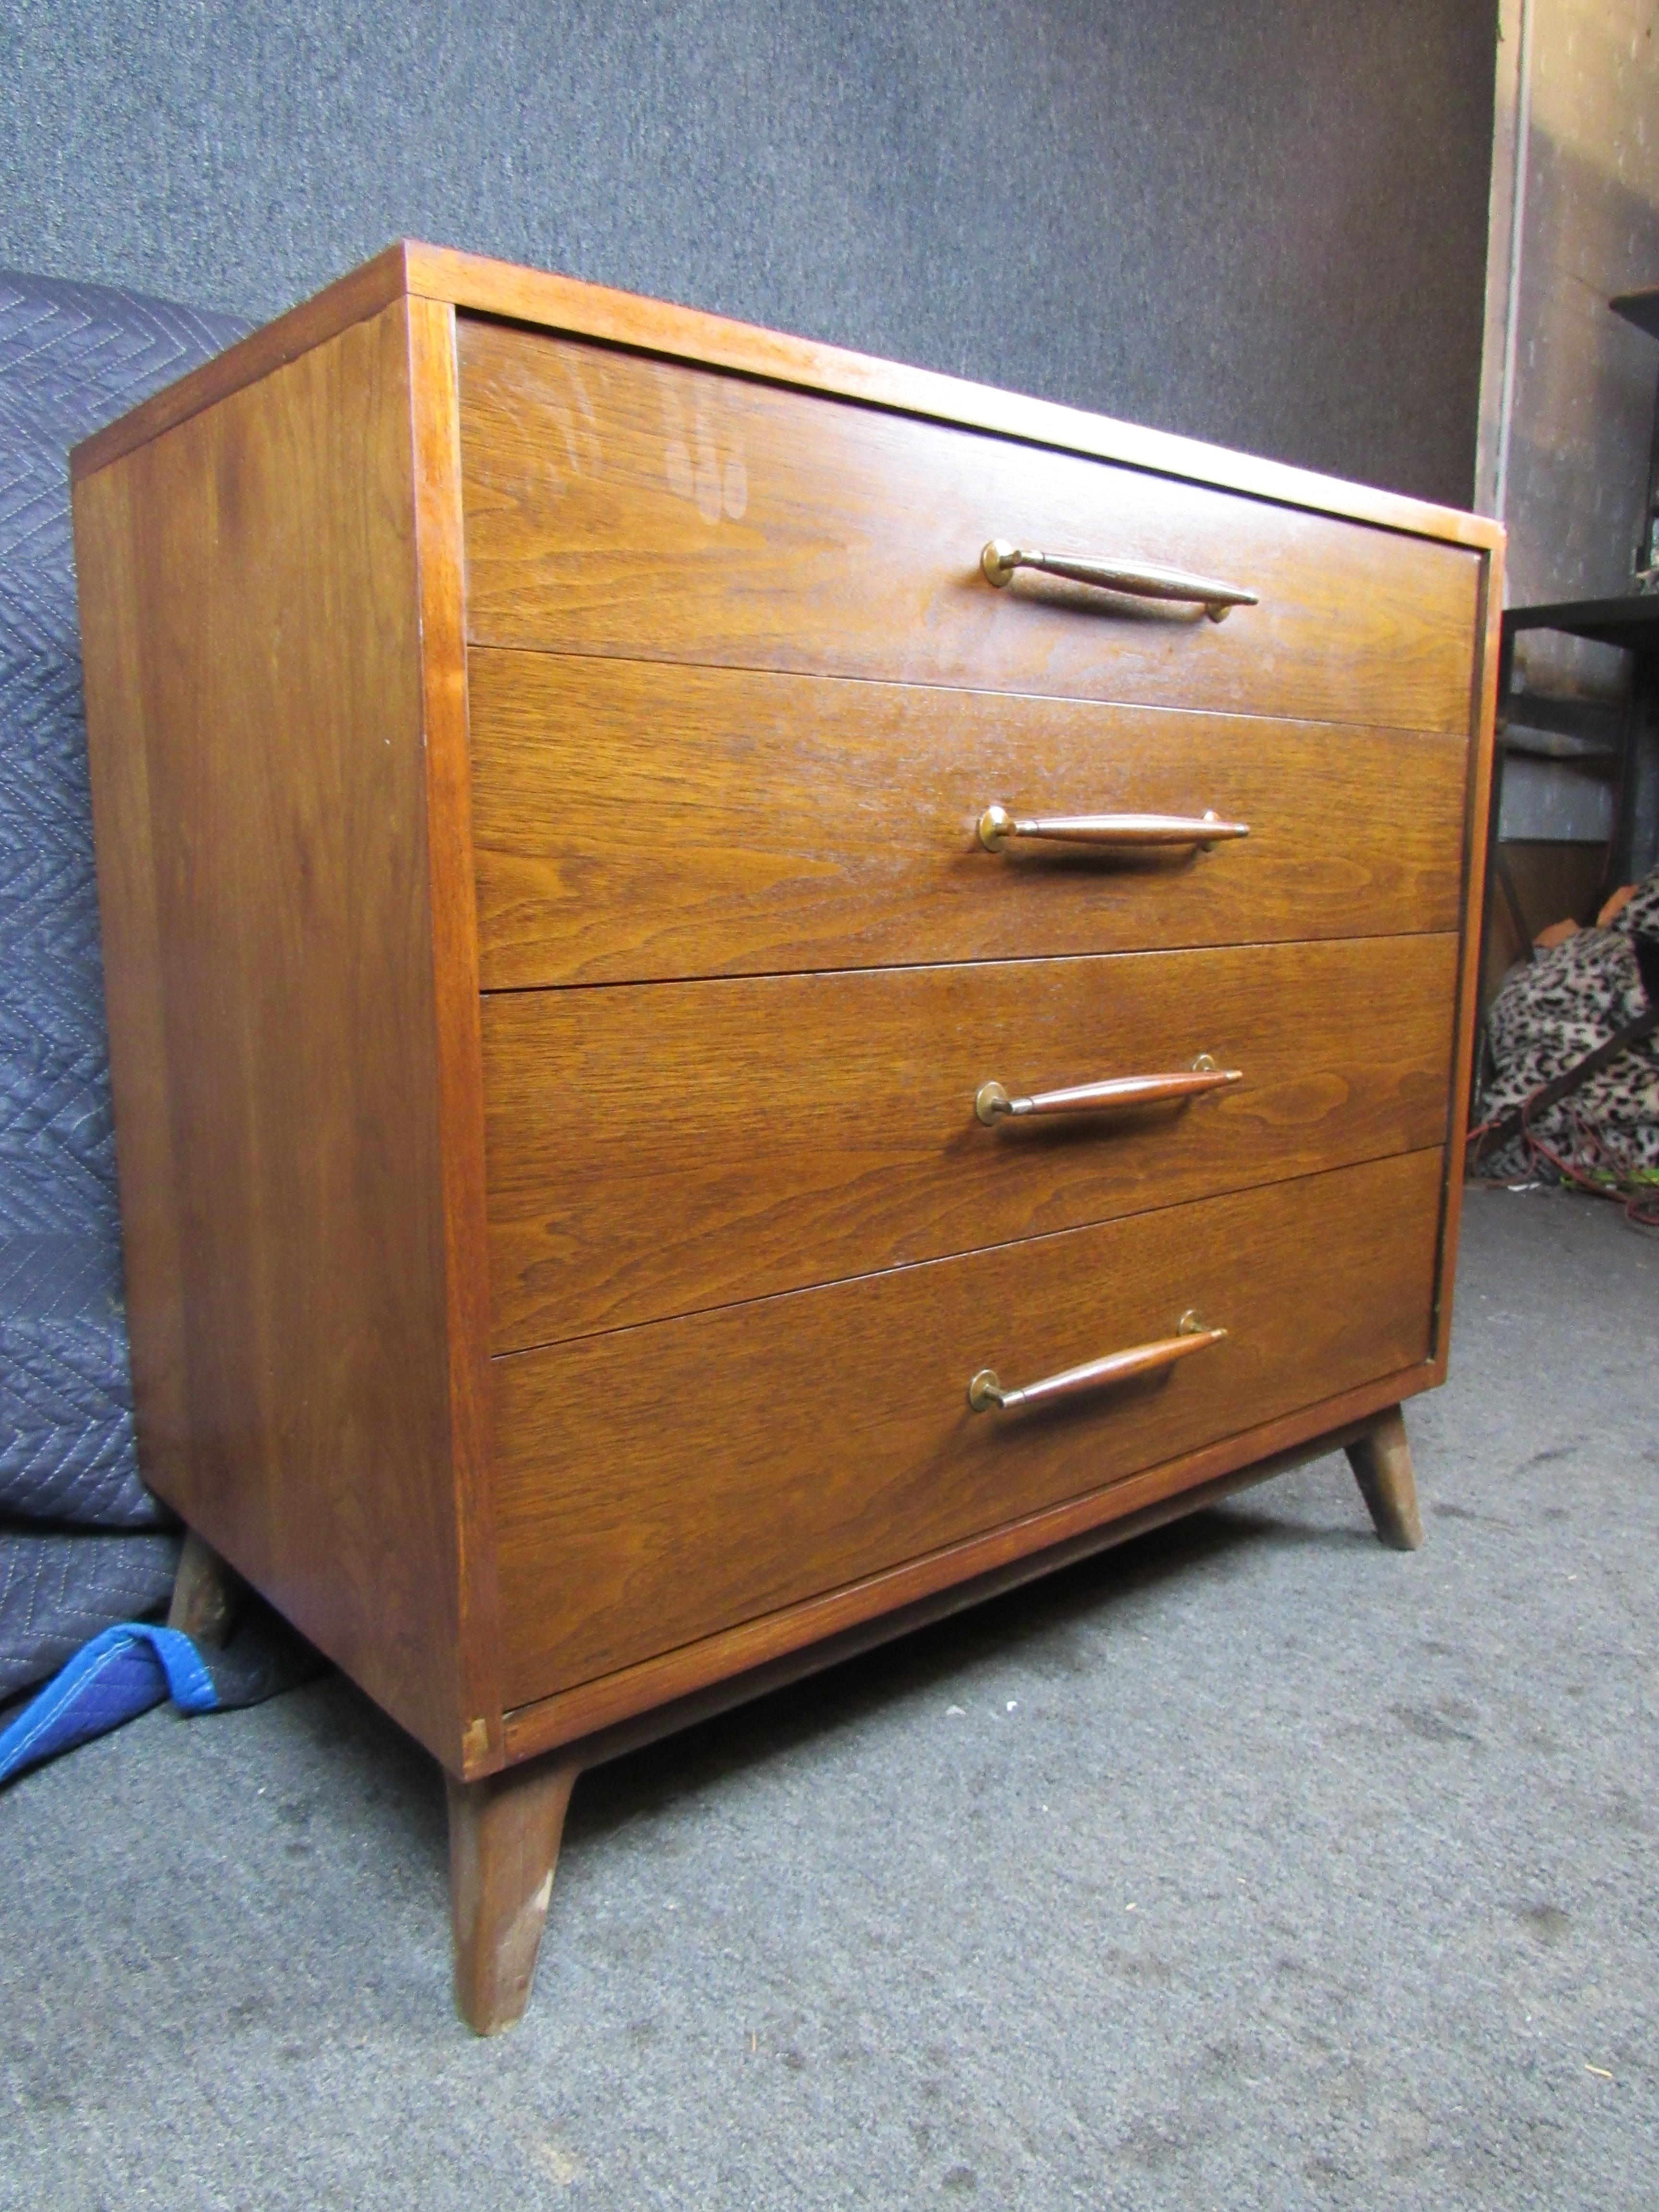 Mid-Century Modern walnut dresser by Heritage Henredon. This dresser has an exceptional design from the perpendicular inlay on the top to the brass and cherry wood stain on the handles. Its compact size makes it versatile, sure to fit amongst any